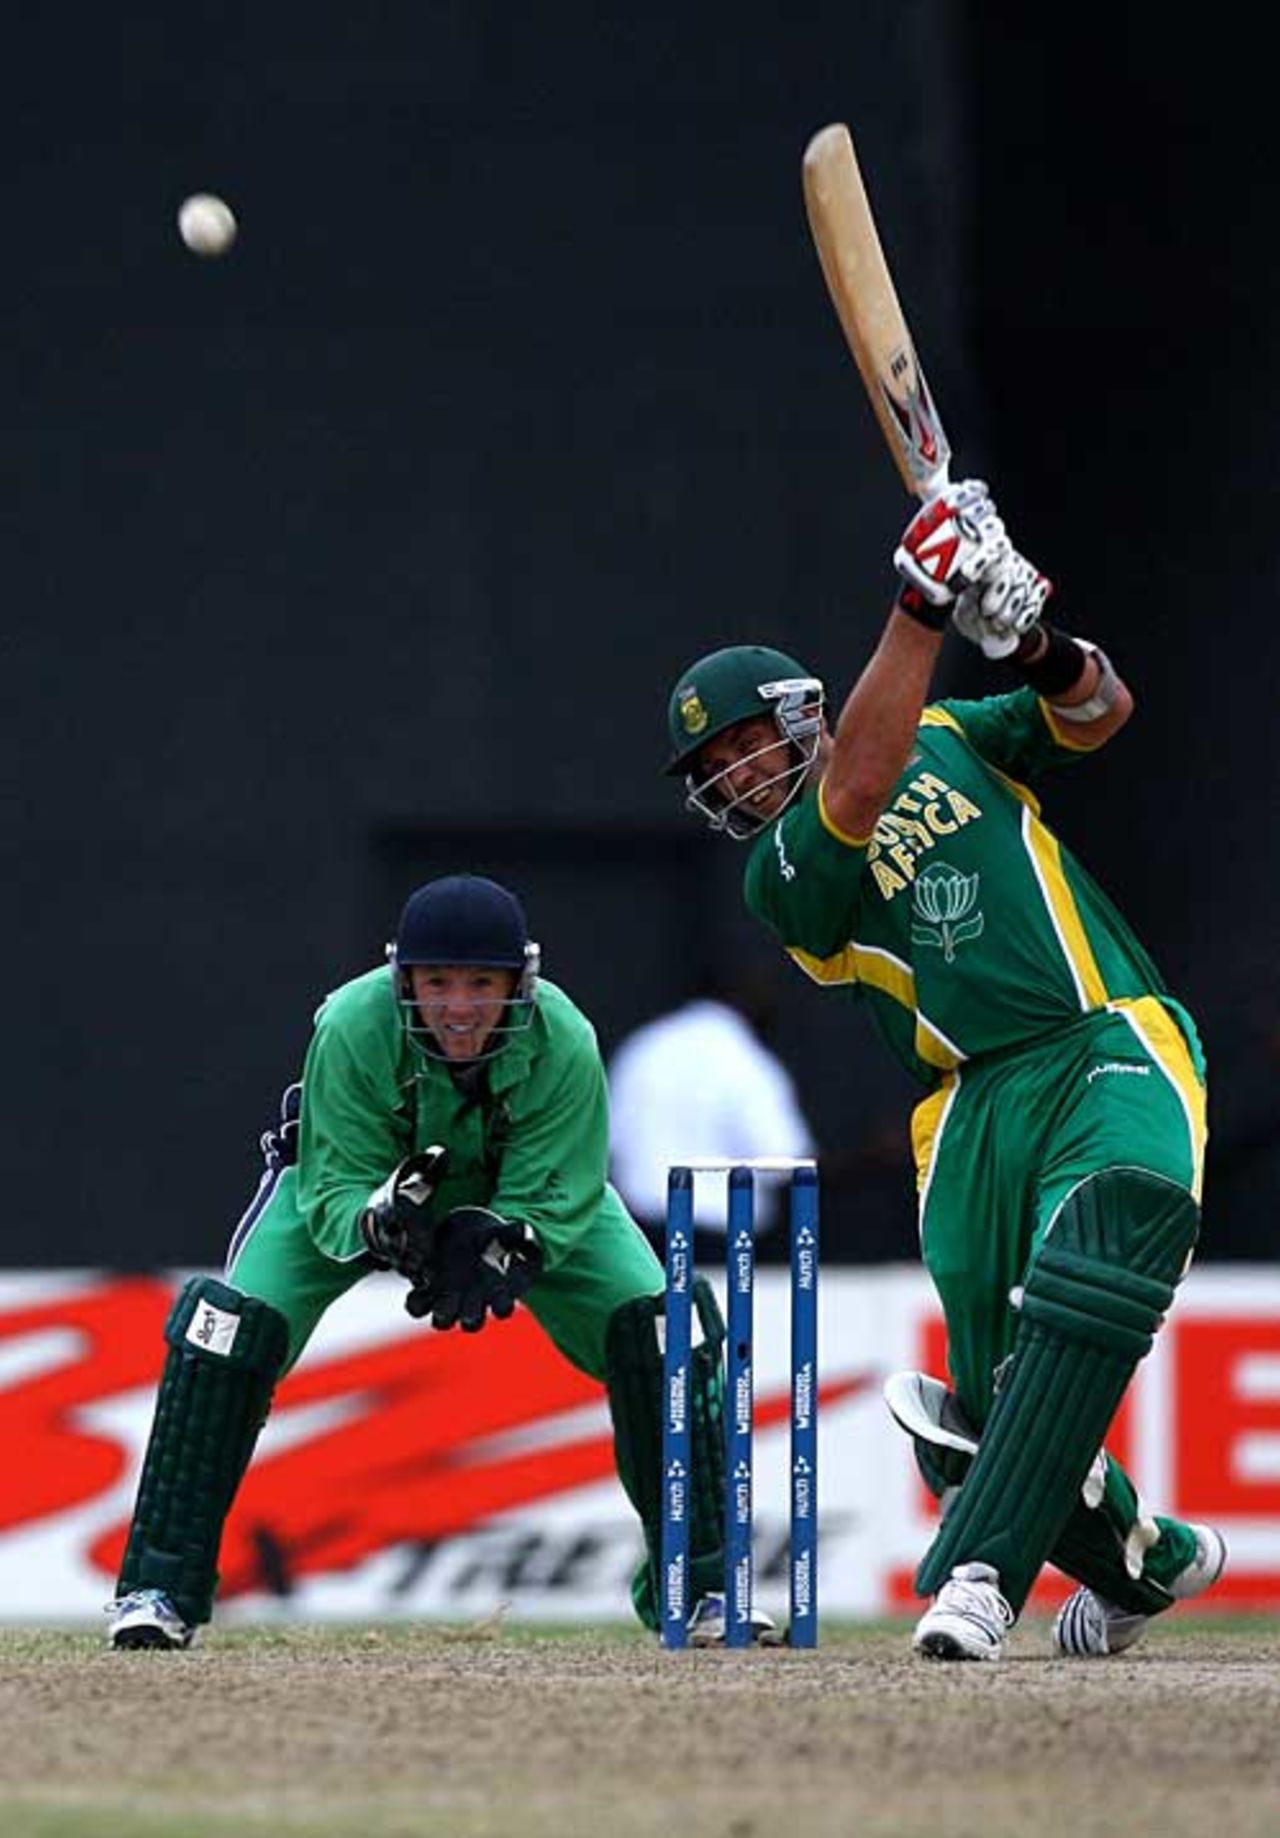 Jacques Kallis steps and goes over mid off during his unbeaten 66, Ireland v South Africa, Guyana, April 3, 2007